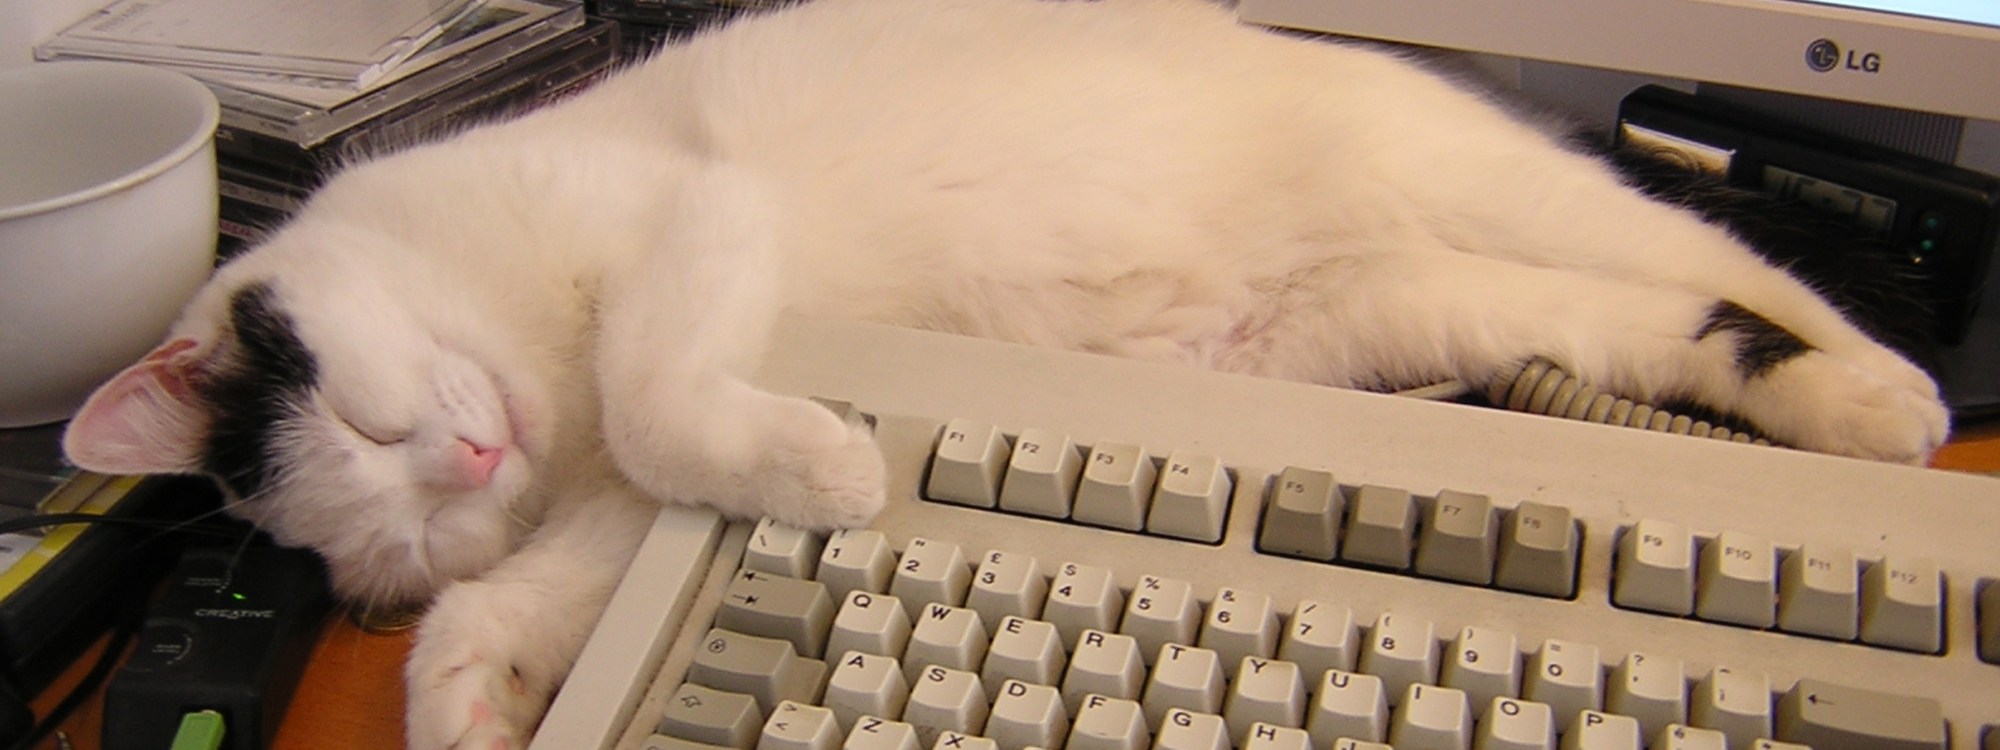 Sheila, a very sleepy cat, soundly napping beside a keyboard.